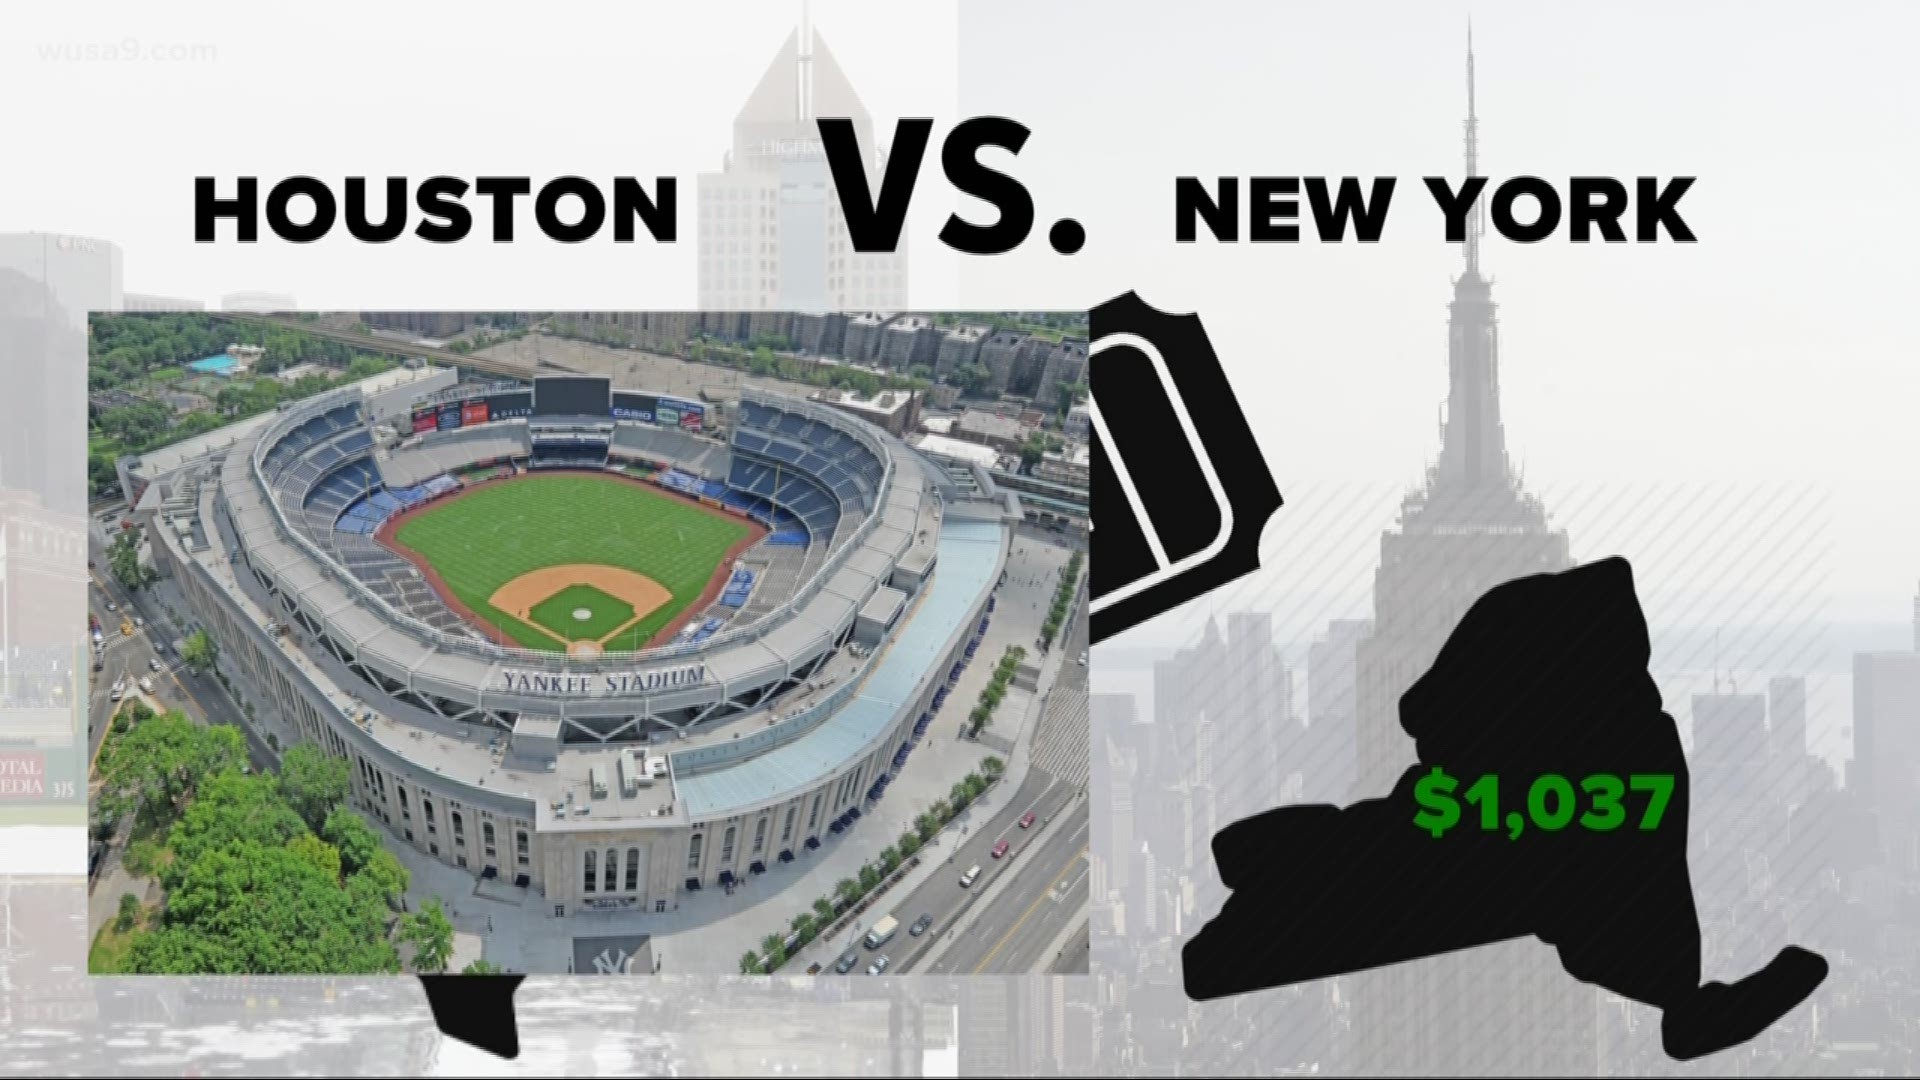 If you're thinking about catching a Nats game in New York or Texas, here's a look at the costs. We have a breakdown of flights, hotel, and tickets.